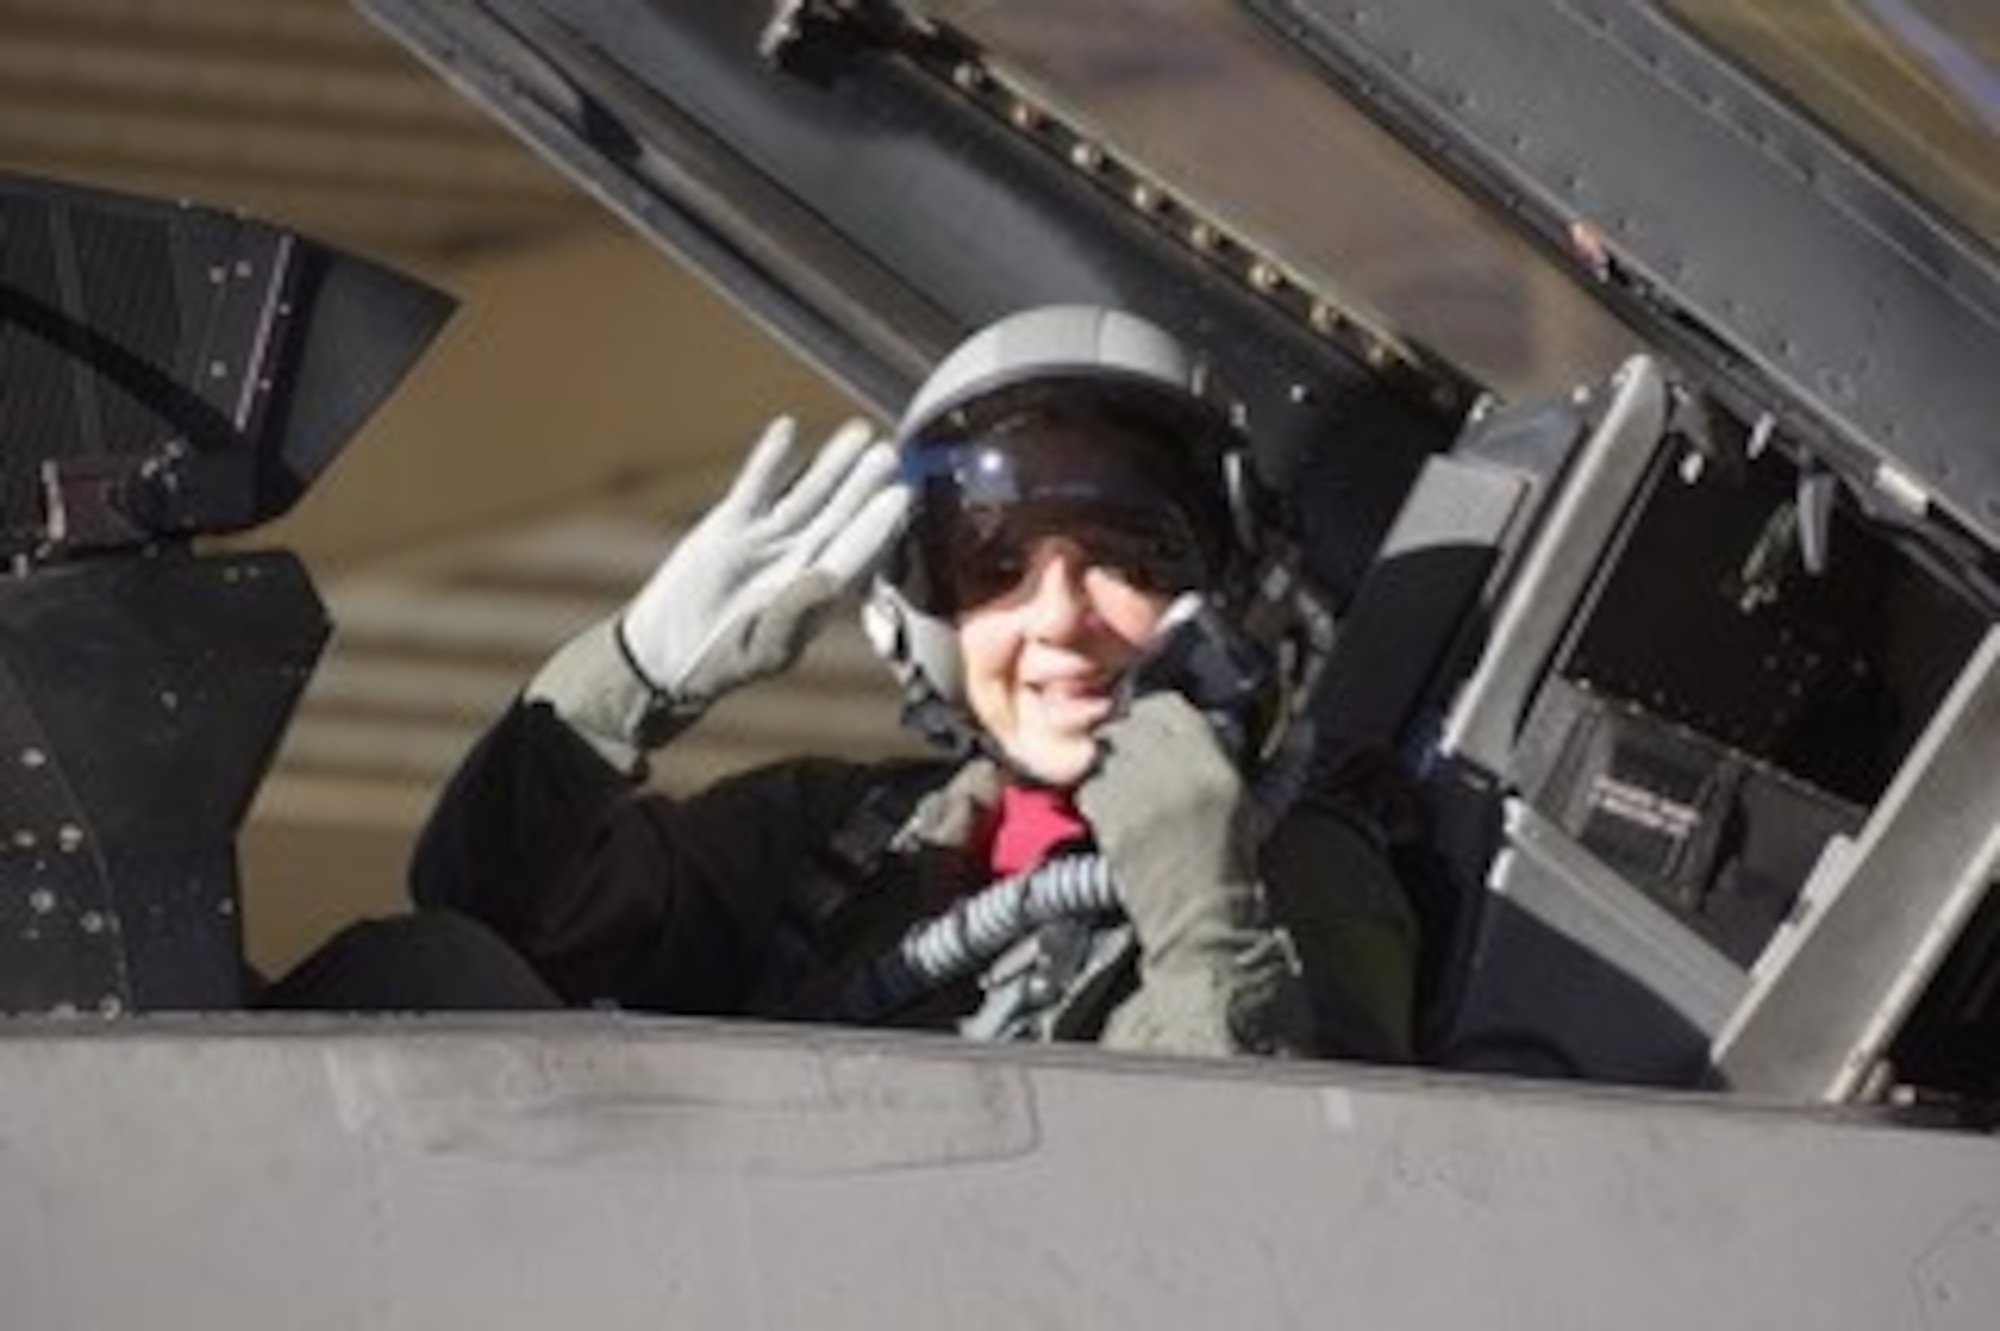 Jill Kimmerle, an honorary commander with the 56th Fighter Wing, departs an F-16 Fighting Falcon after her flight, Jan. 26, 2022, at Luke Air Force Base, Arizona.